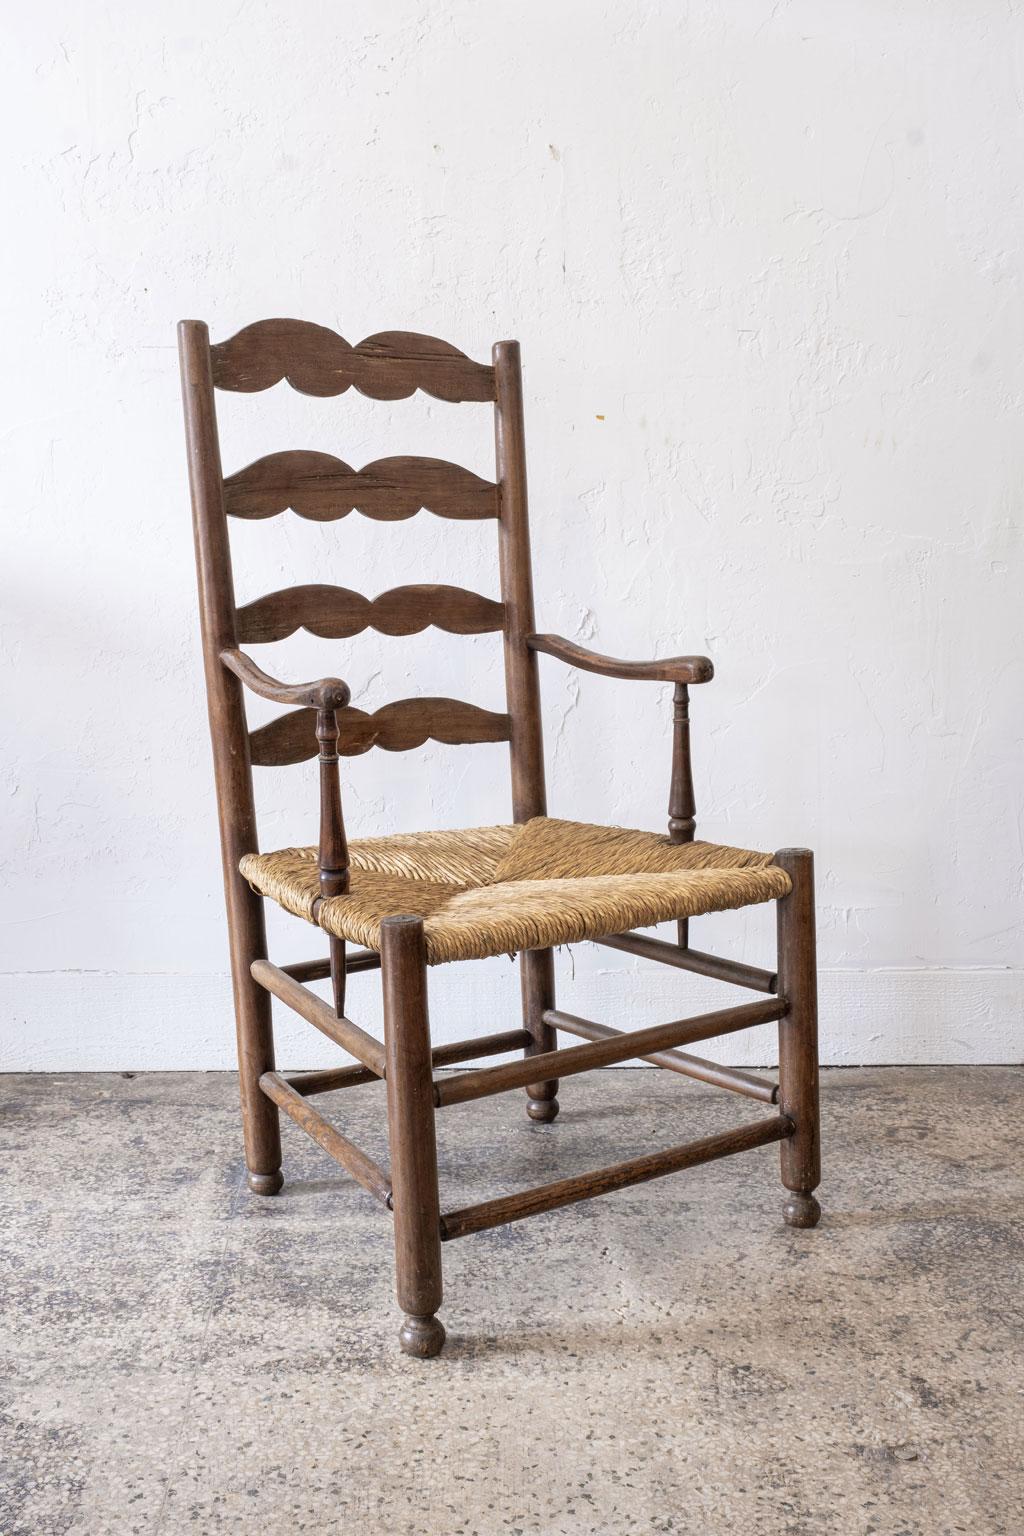 Rustic French ladder back armchair, circa 1840-1860. The shape of the scrolled ladder back slats and delicately carved arms of this chair are characteristic of furniture from the Southwest region of France. The rush seat has a beautiful patina and